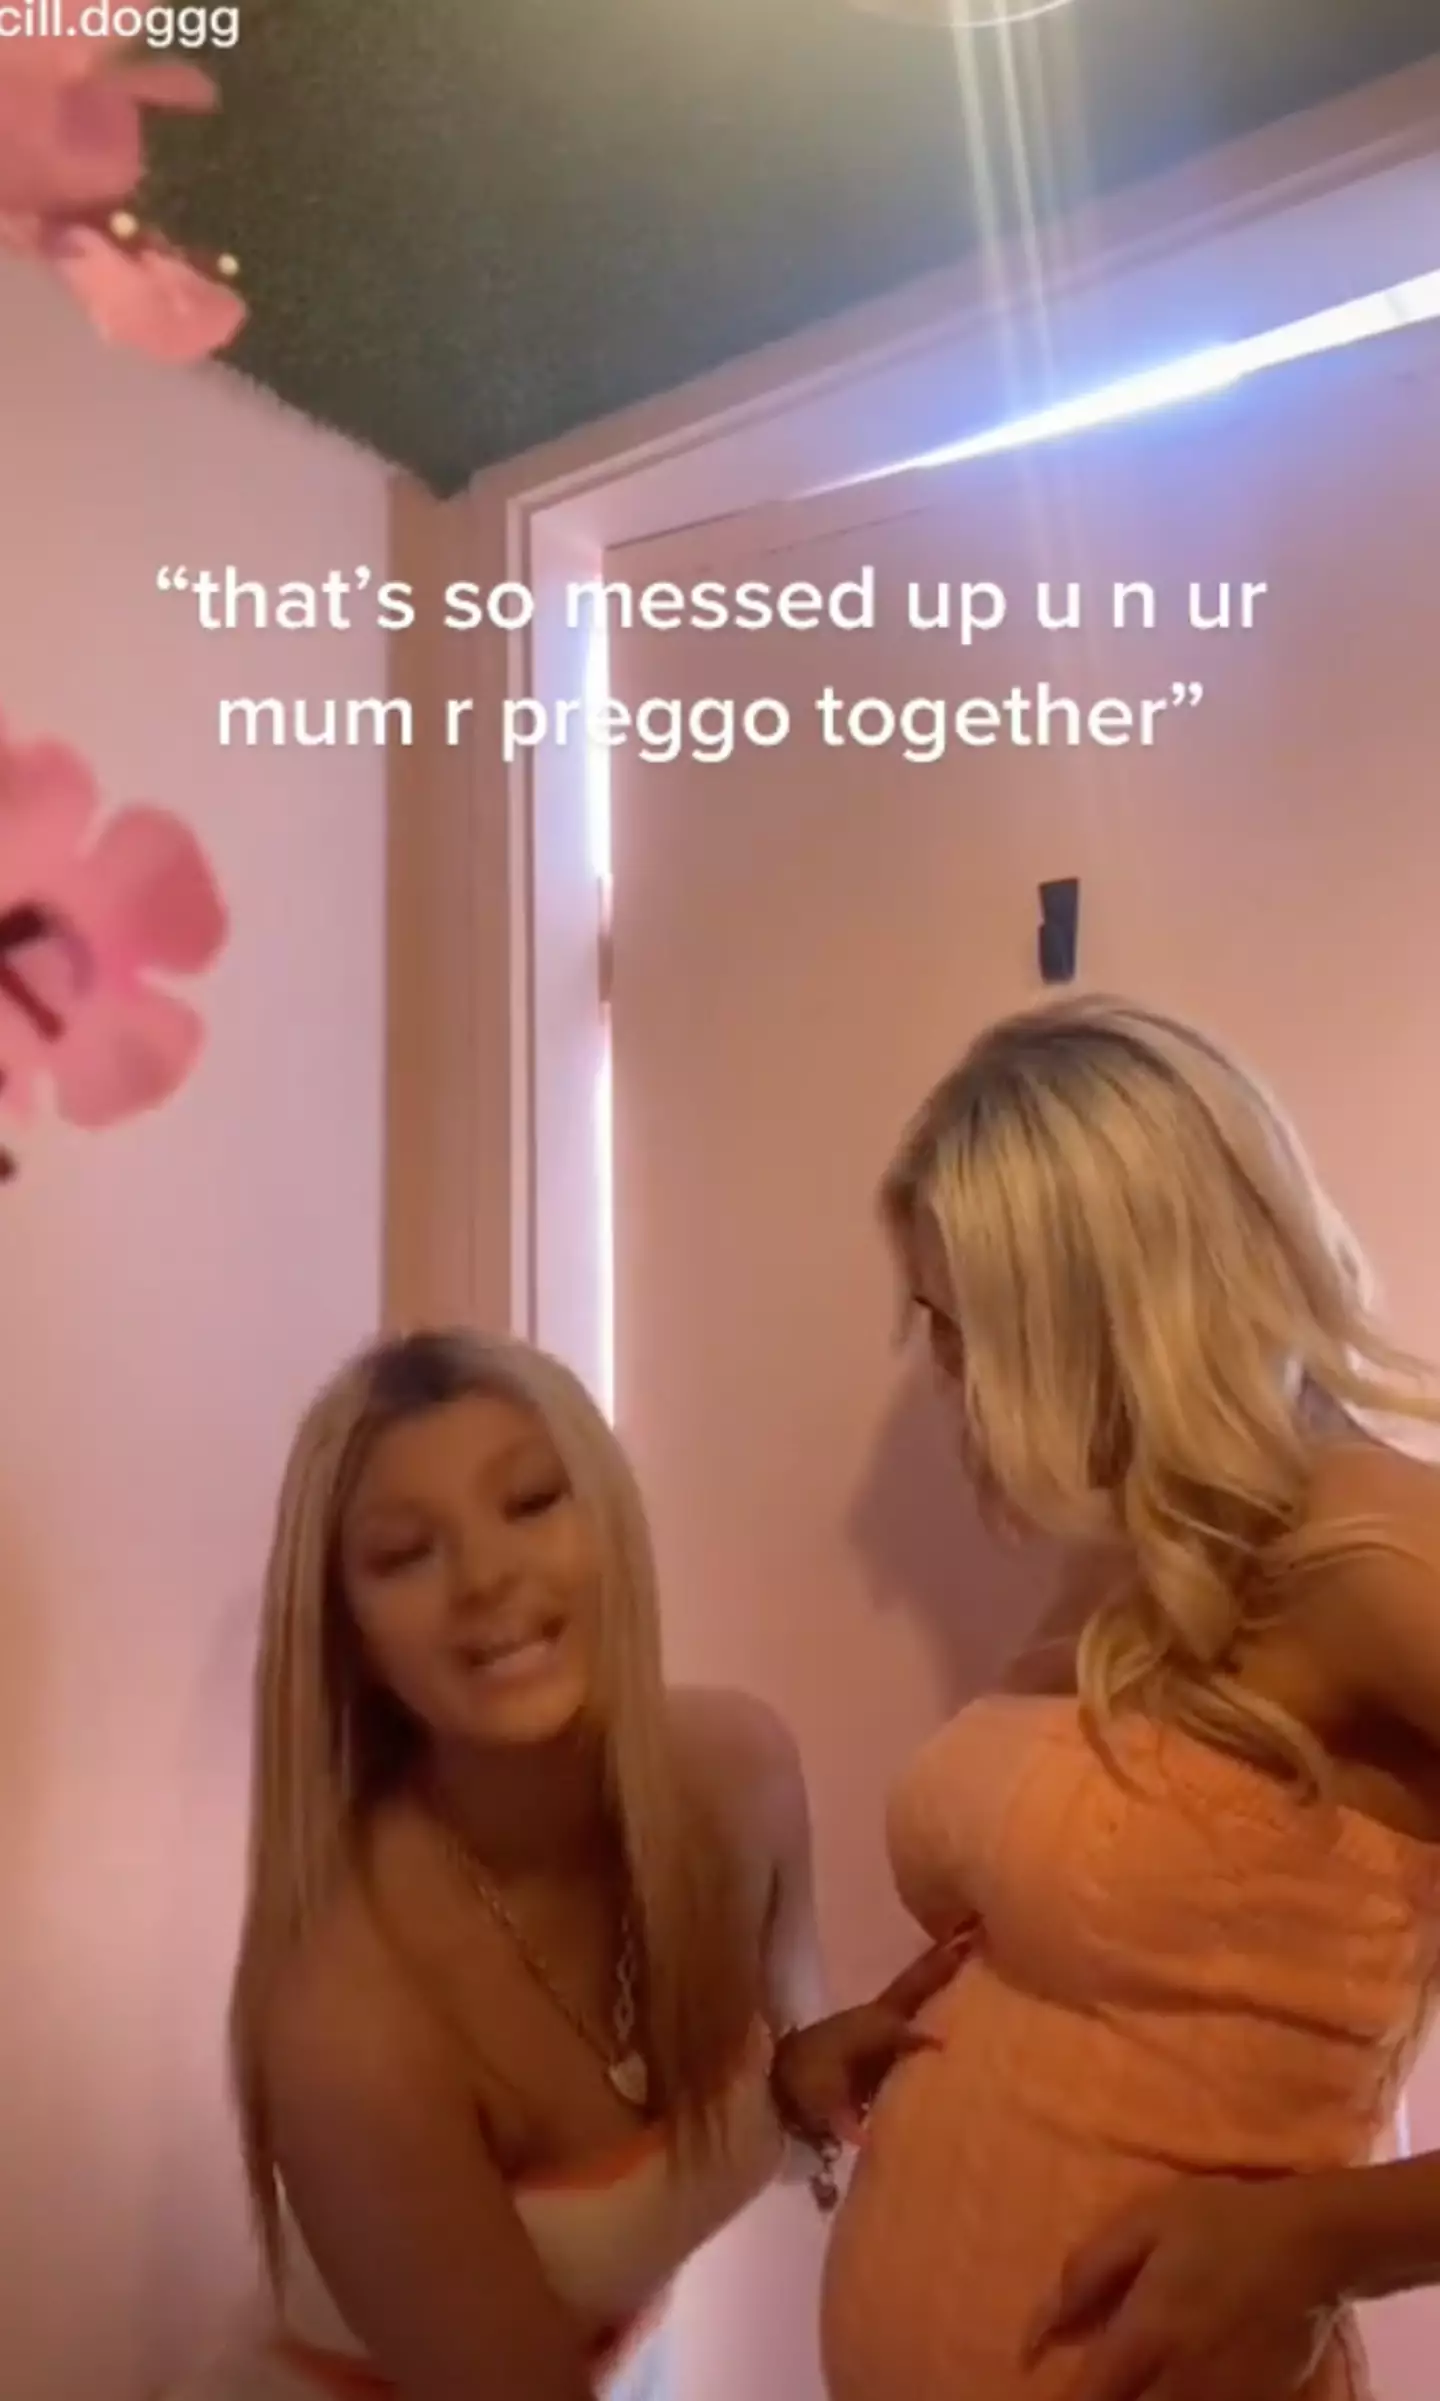 Priscilla shared the video of her and her mum, who are both pregnant.